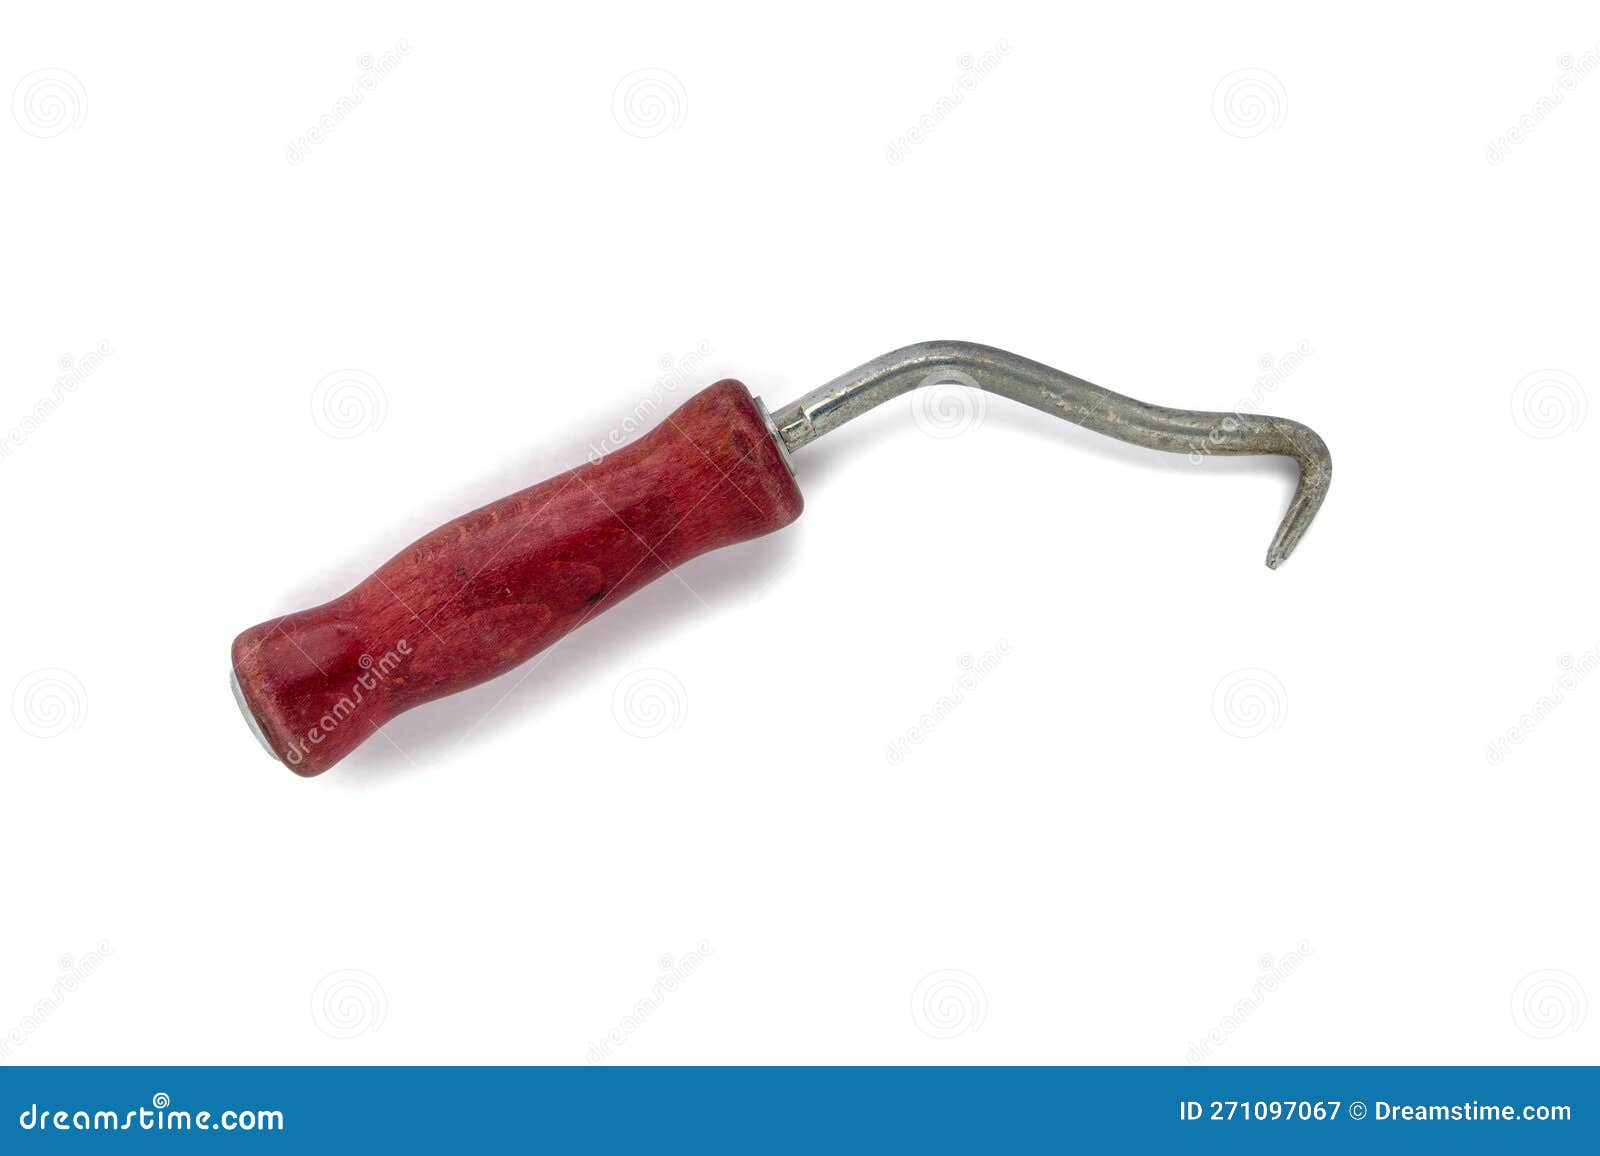 Rebar Tying Hook with Red Wooden Handle, Isolated on White Stock Image -  Image of hook, reinforcement: 271097067